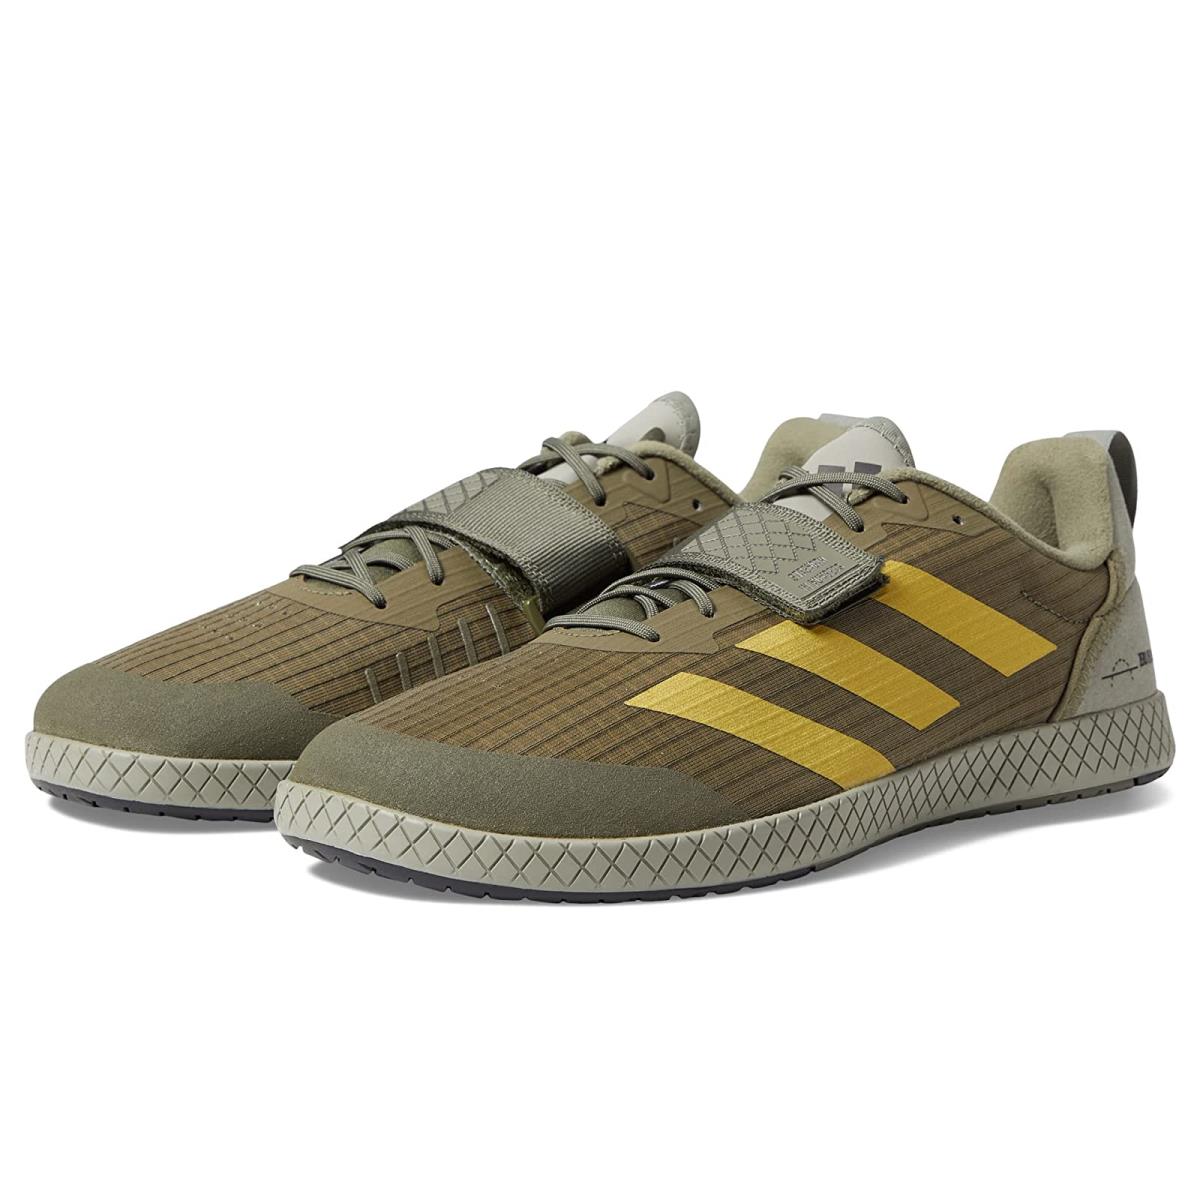 Unisex Sneakers Athletic Shoes Adidas The Total Olive Strata/Matte Gold/Silver Pebble